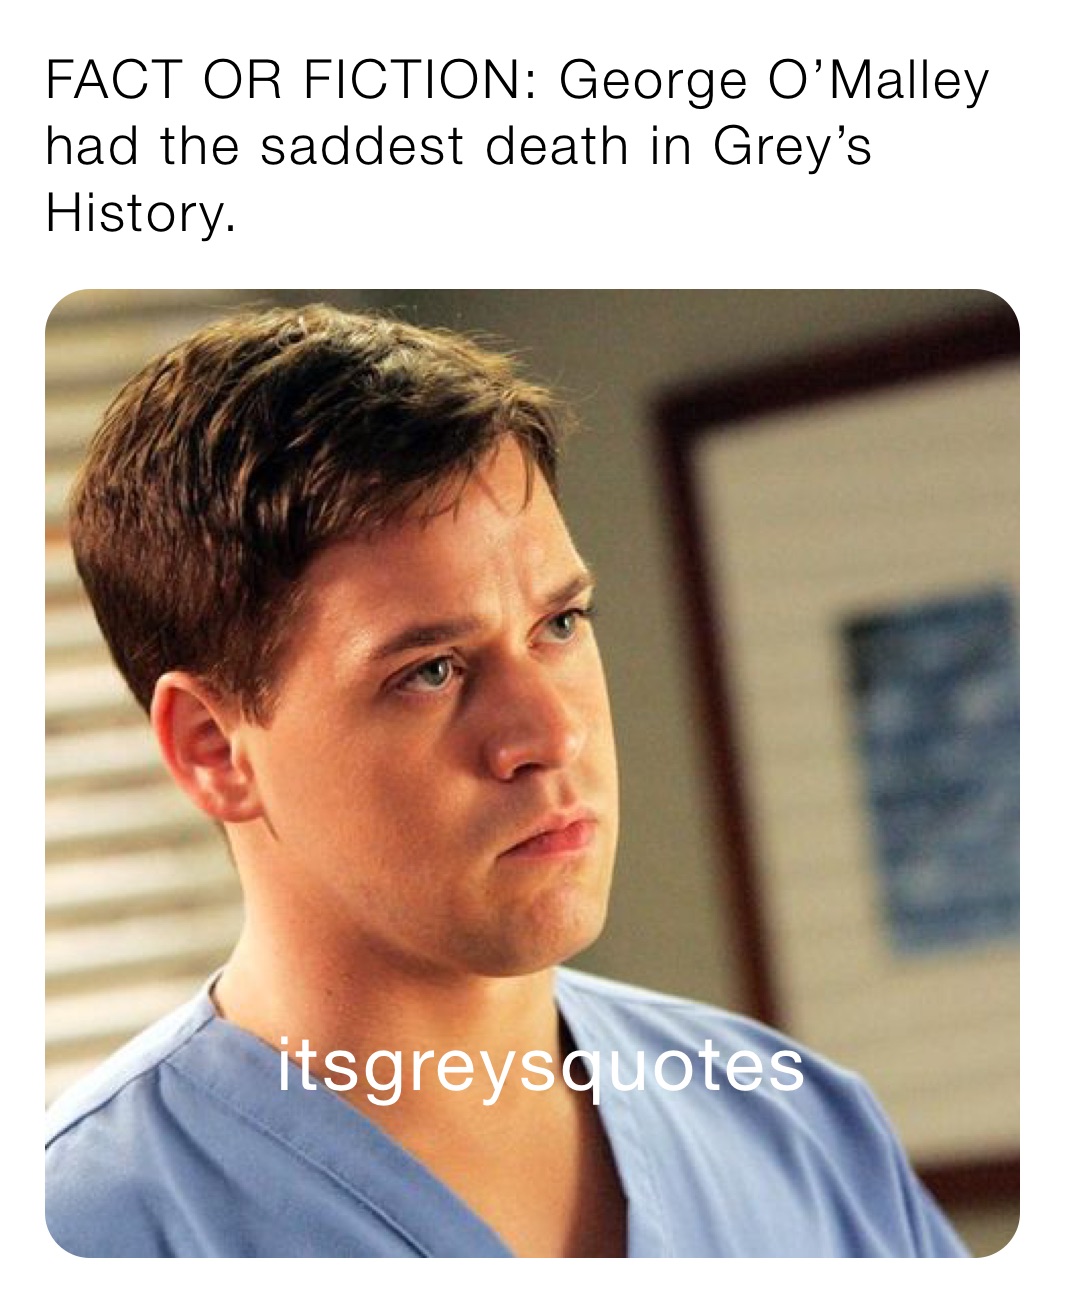 FACT OR FICTION: George O’Malley had the saddest death in Grey’s History.